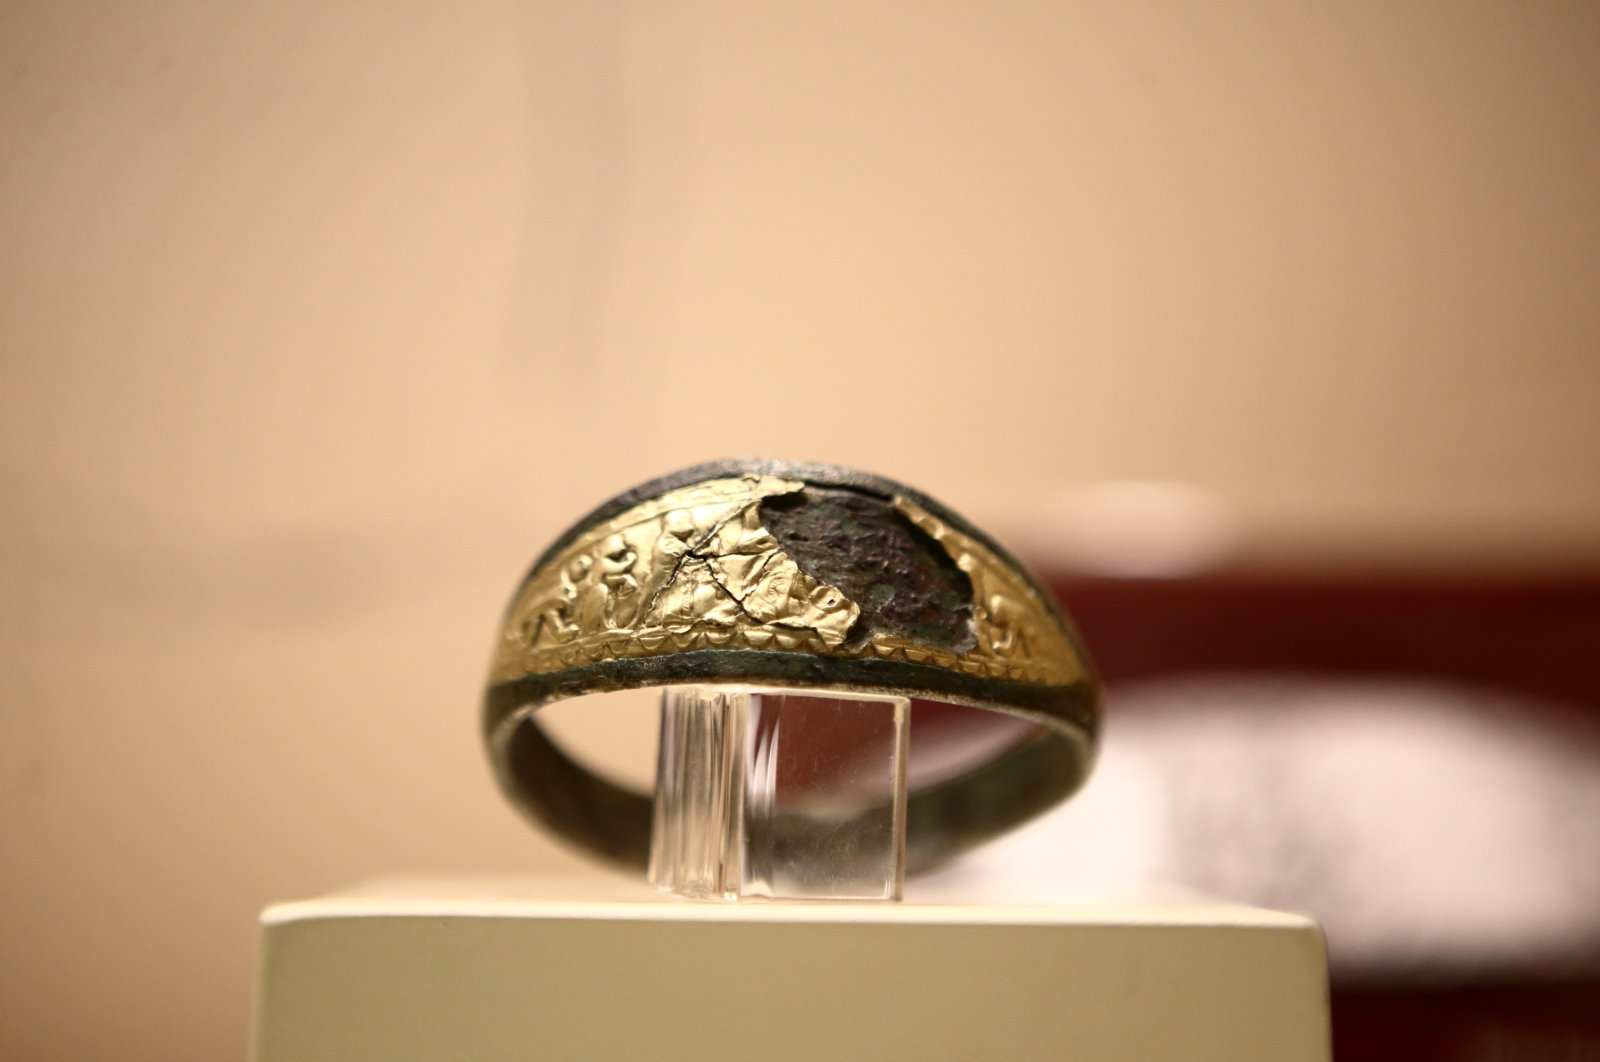 The 3,500-year-old Hittite bracelet discovered by a Turkish farmer in Çorum, is on display at the Çorum Museum, March 27, 2022. (AA Photo)